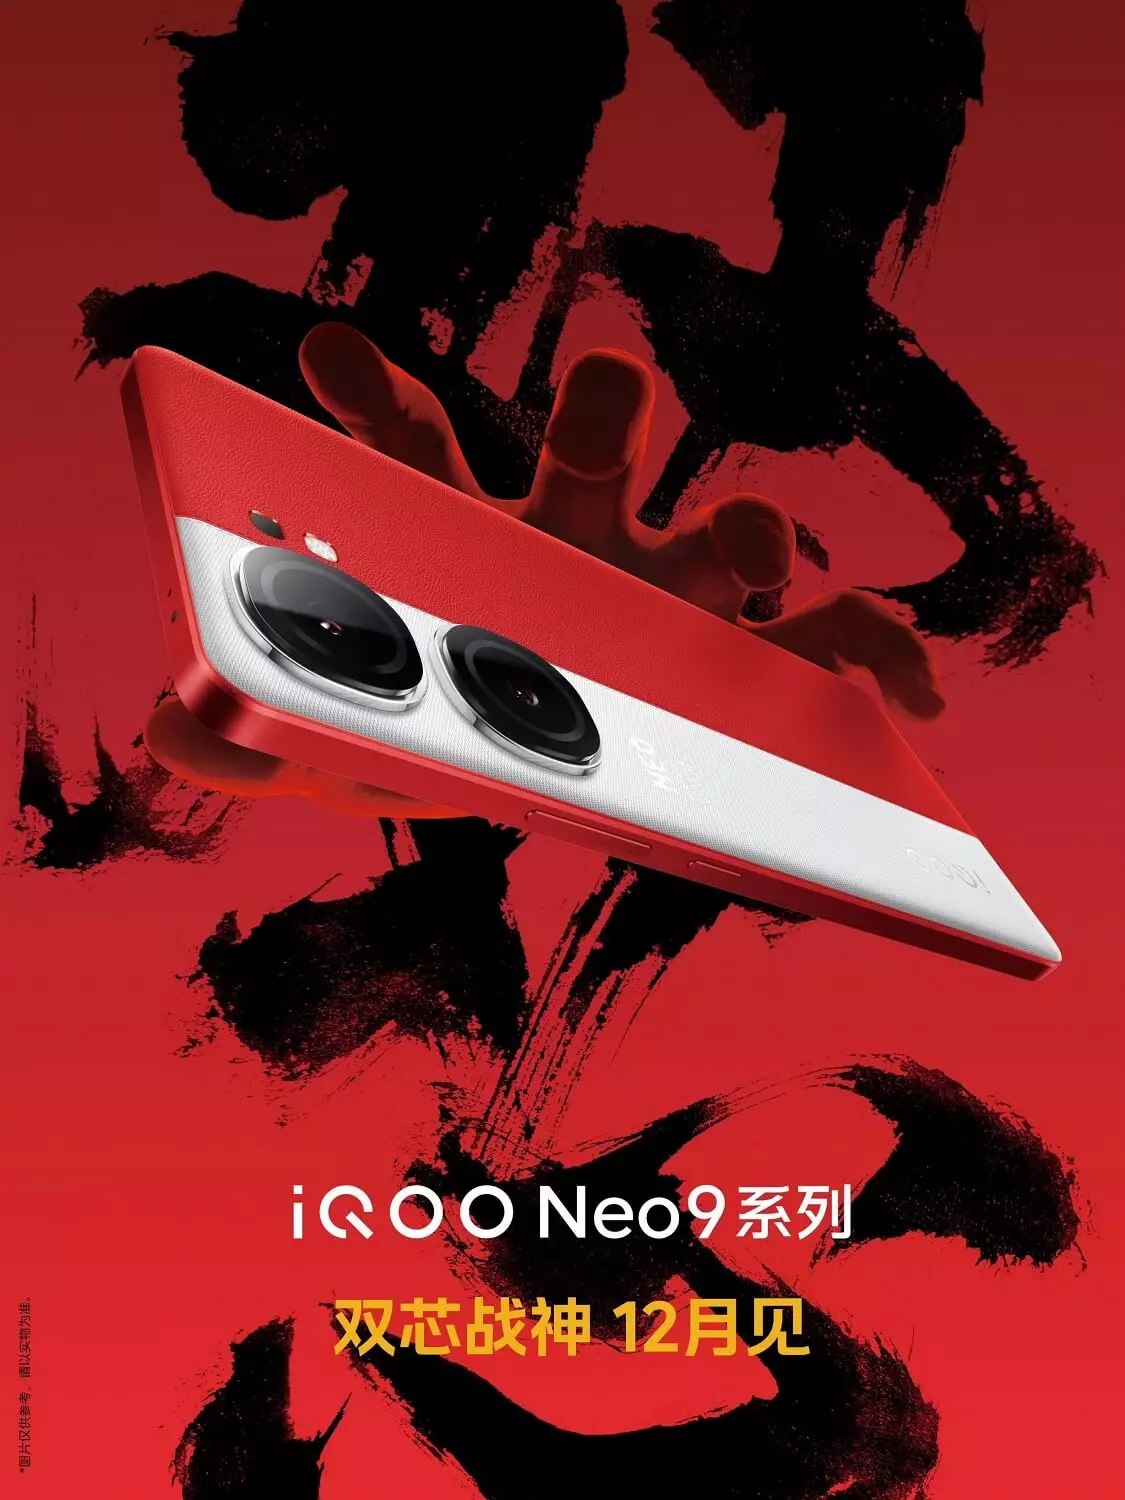 iQOO Neo9 and Neo9 Pro launch date teaser.